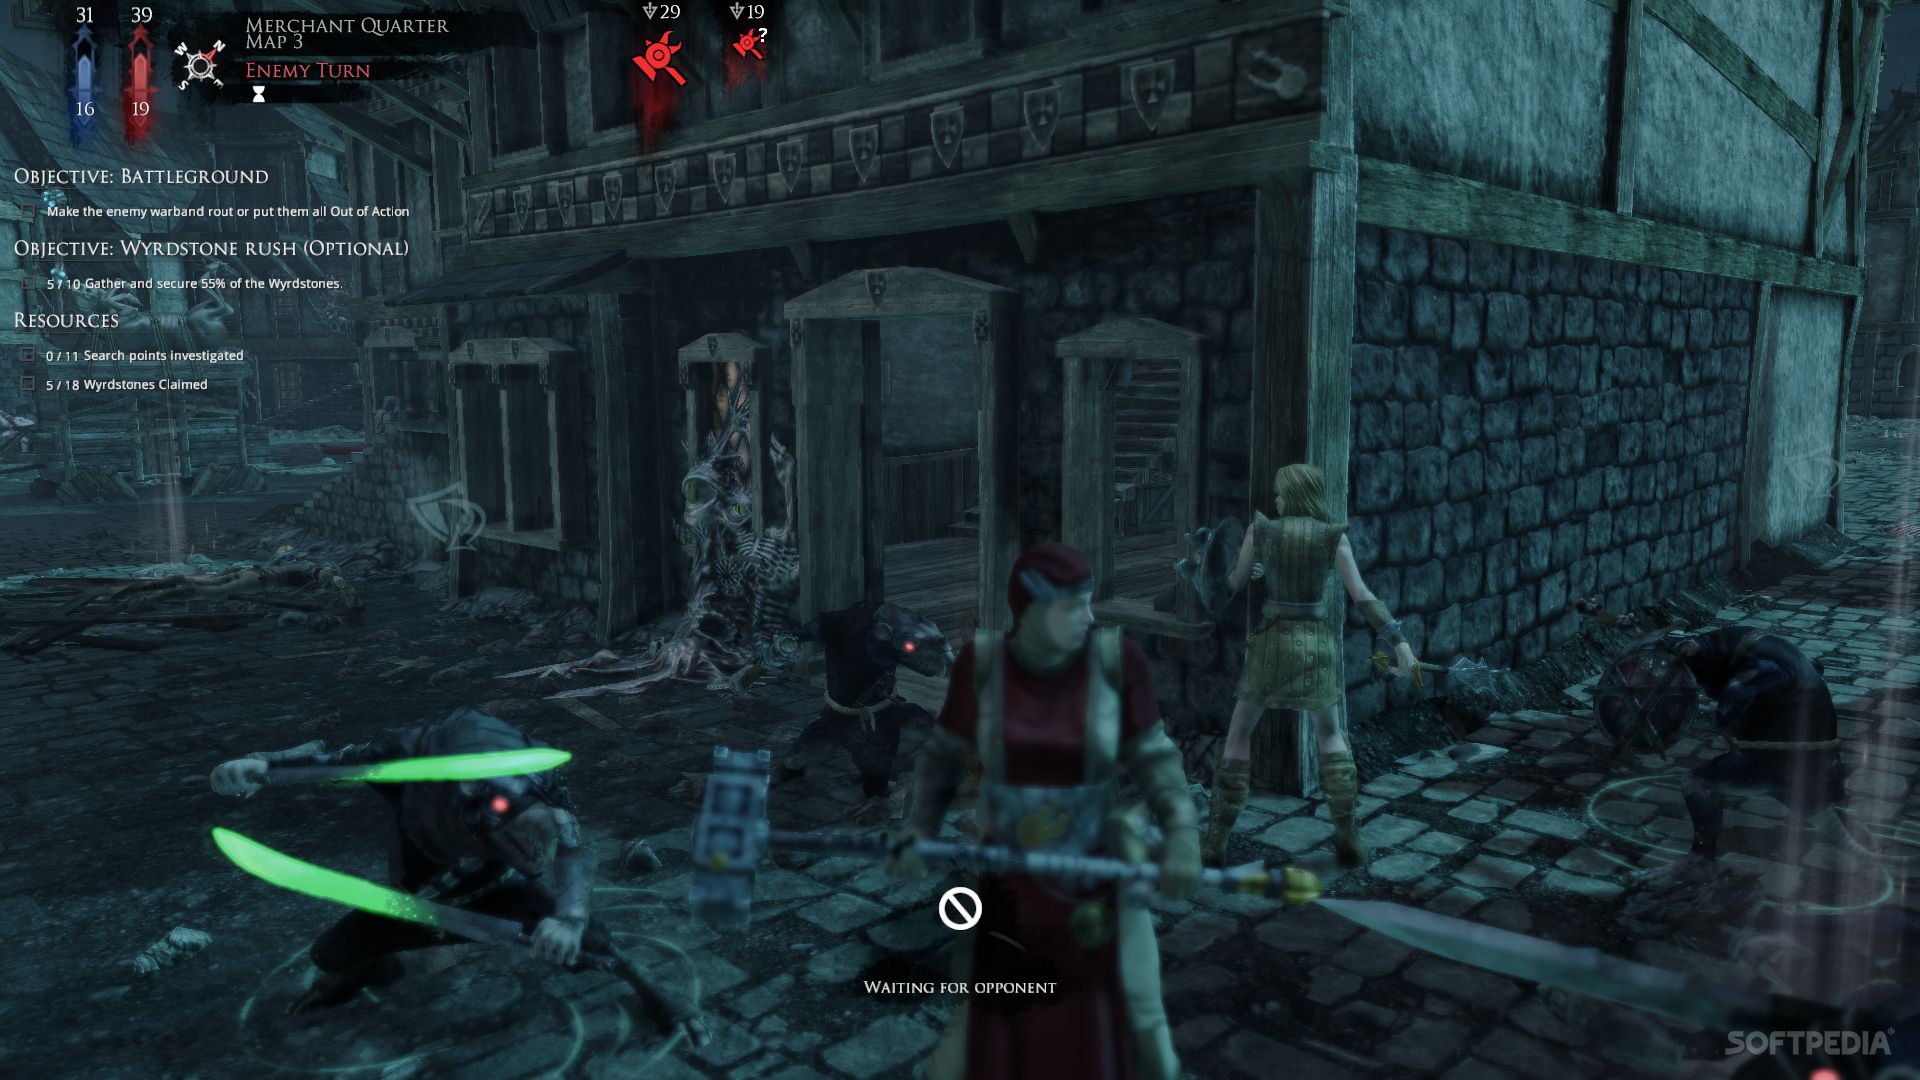 Mordheim: City of the Damned enters Early Access Phase 5 - Saving